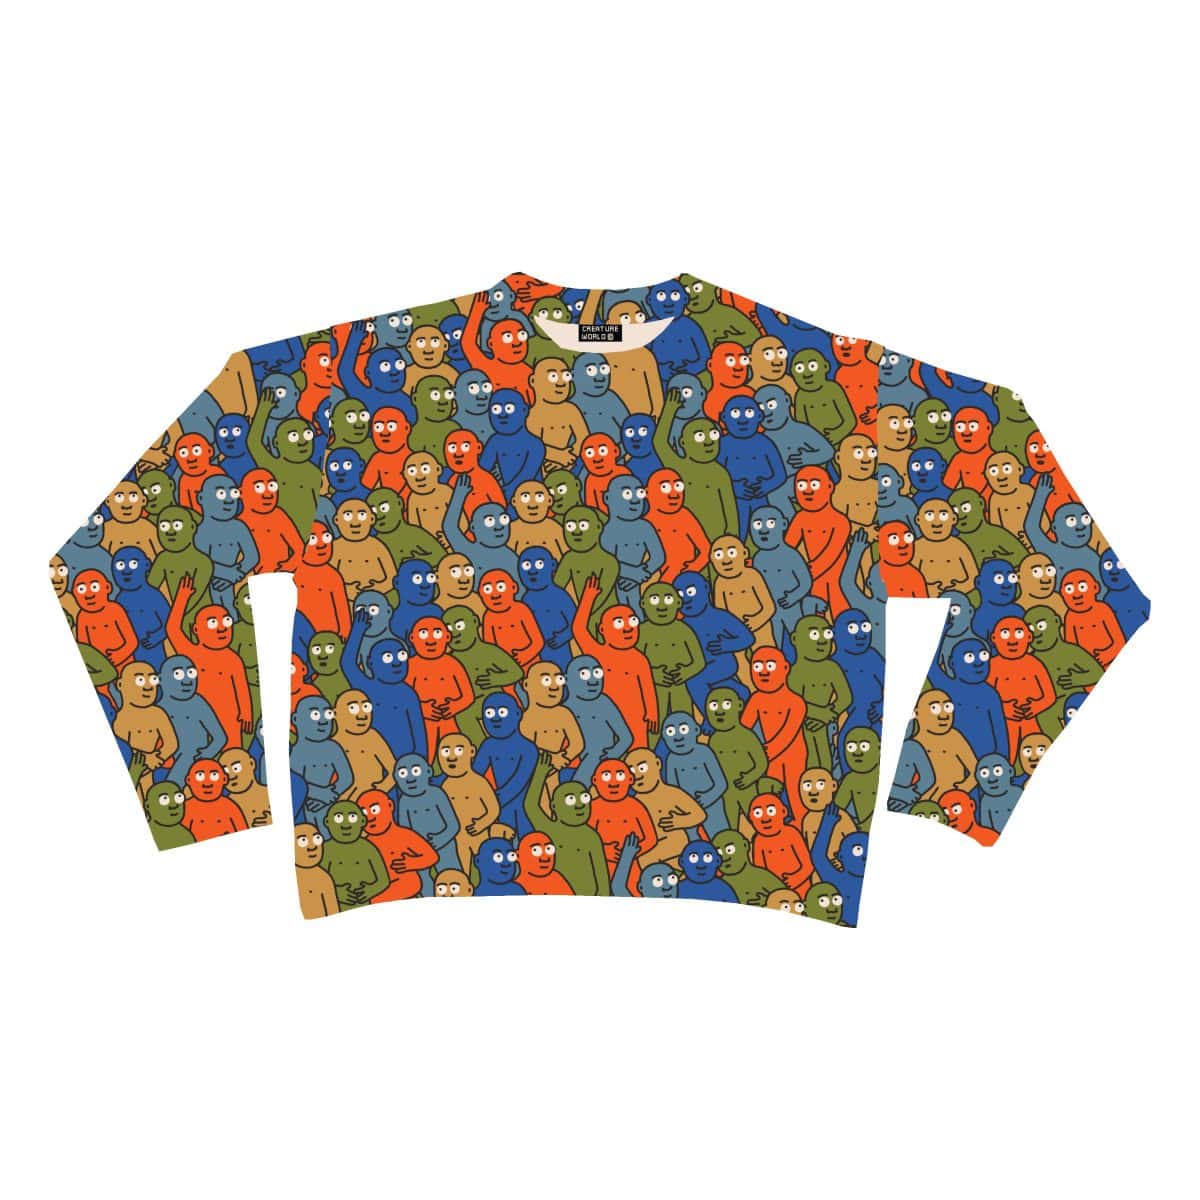 The crowd appears on the sweaters that Cole sells as part of its Creation Worlds brand.